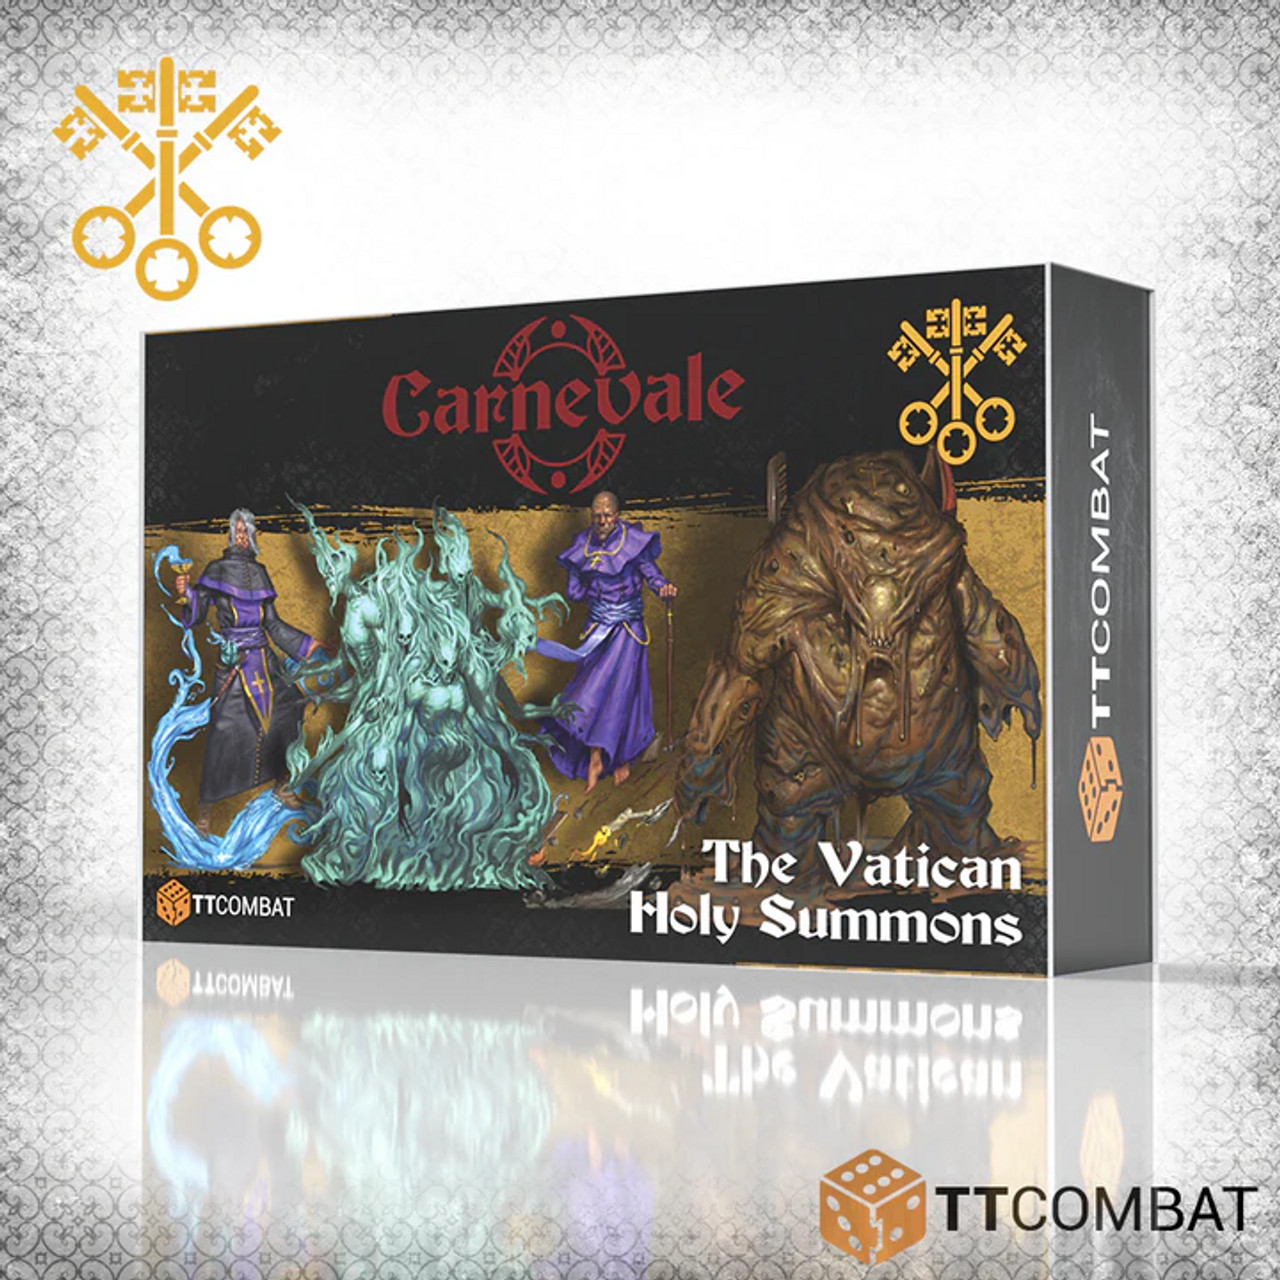 The Vatican: Holy Summons